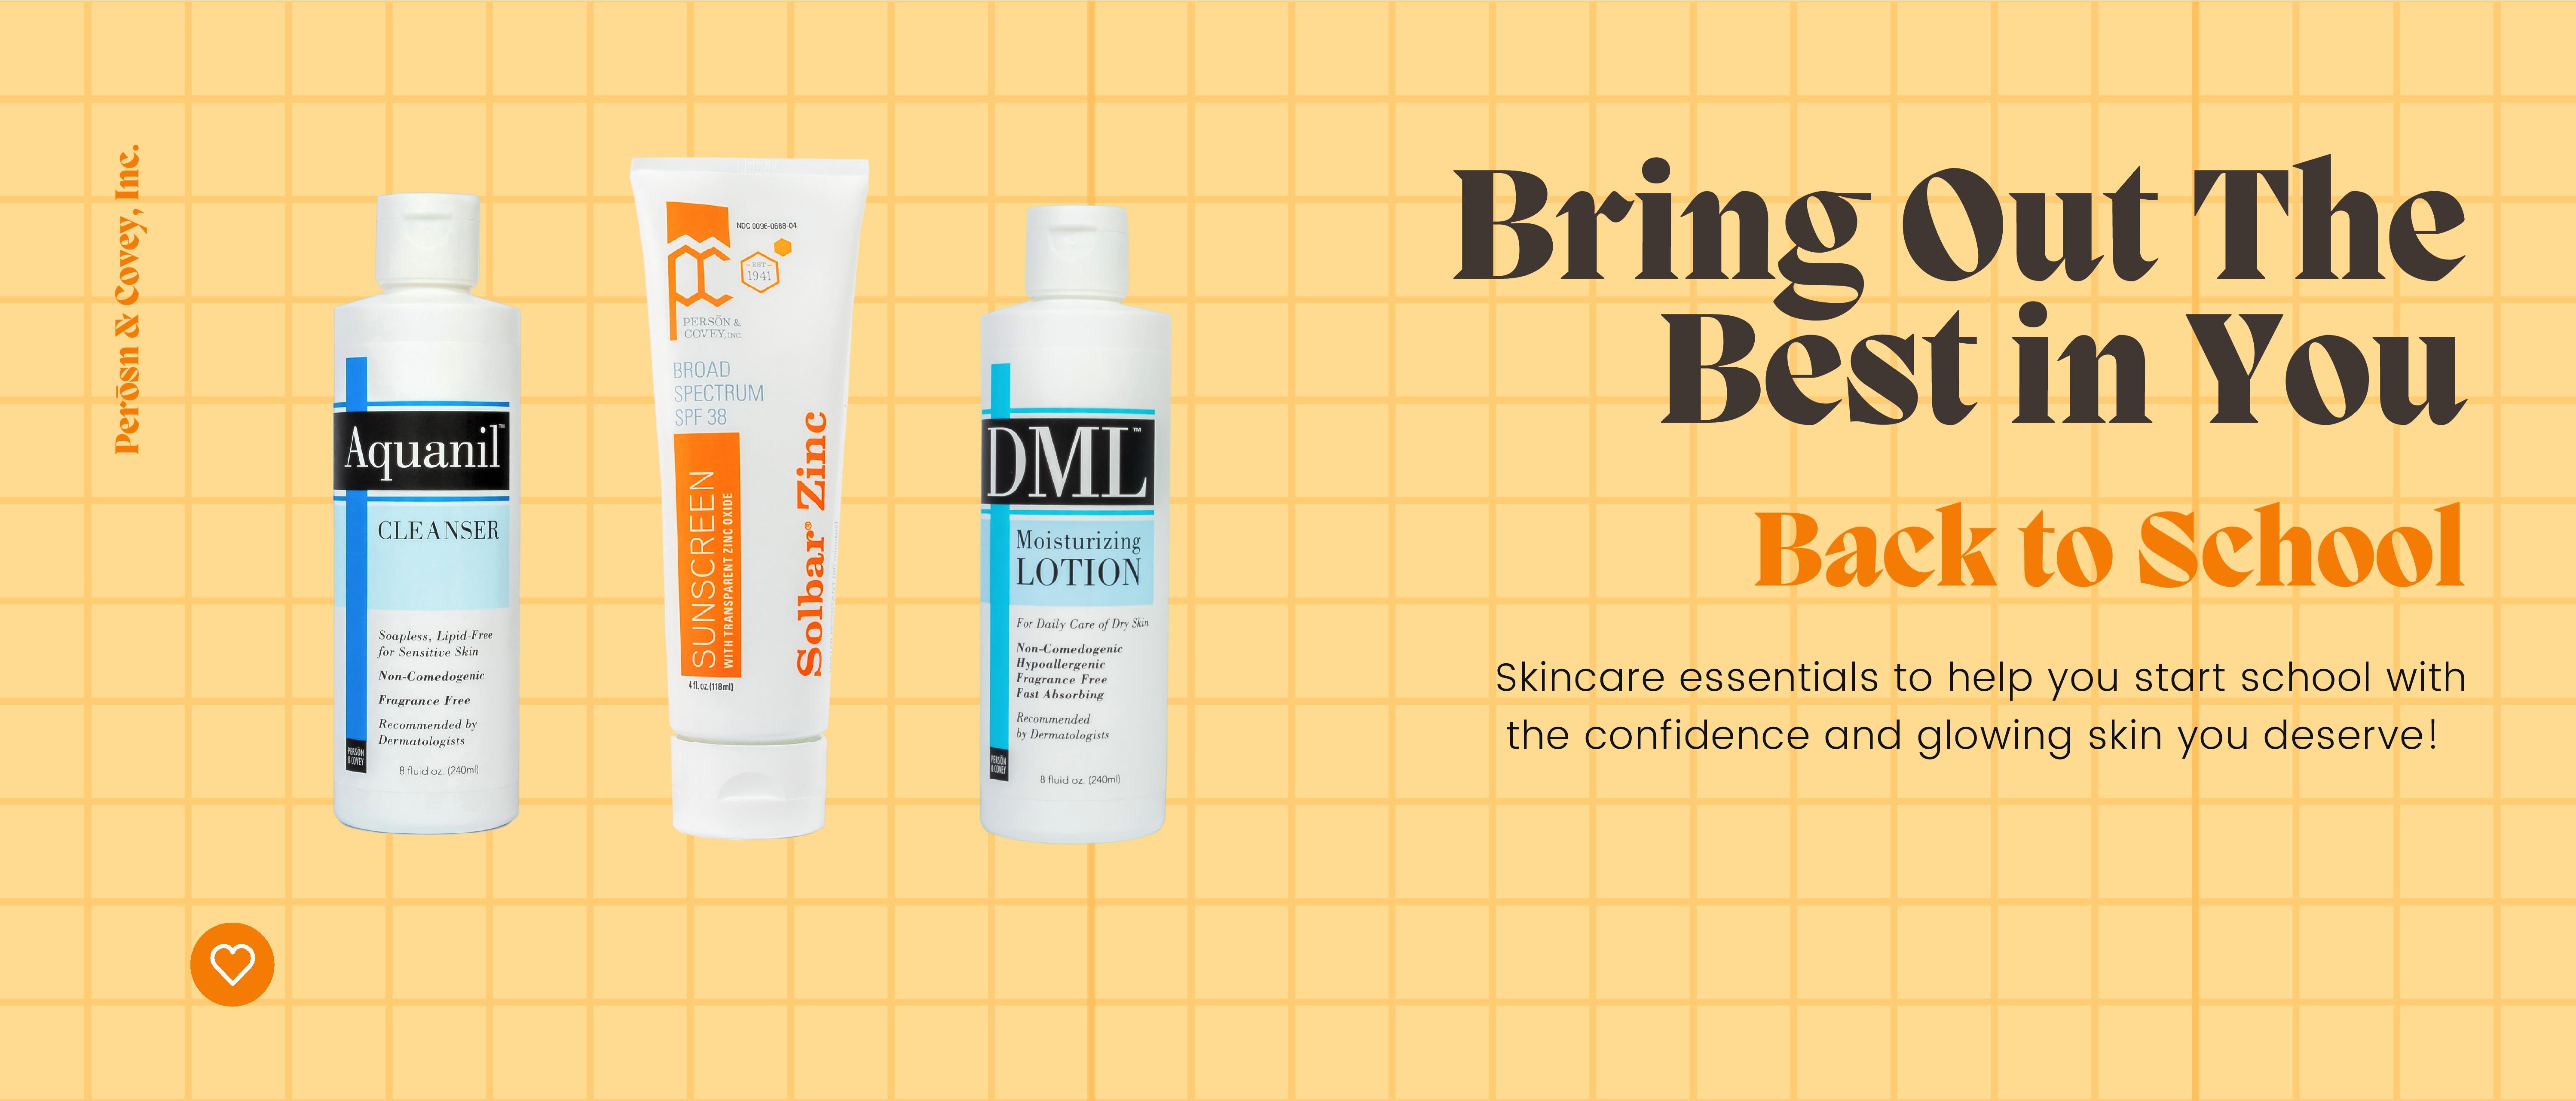 Bring out the best in you back to school skincare